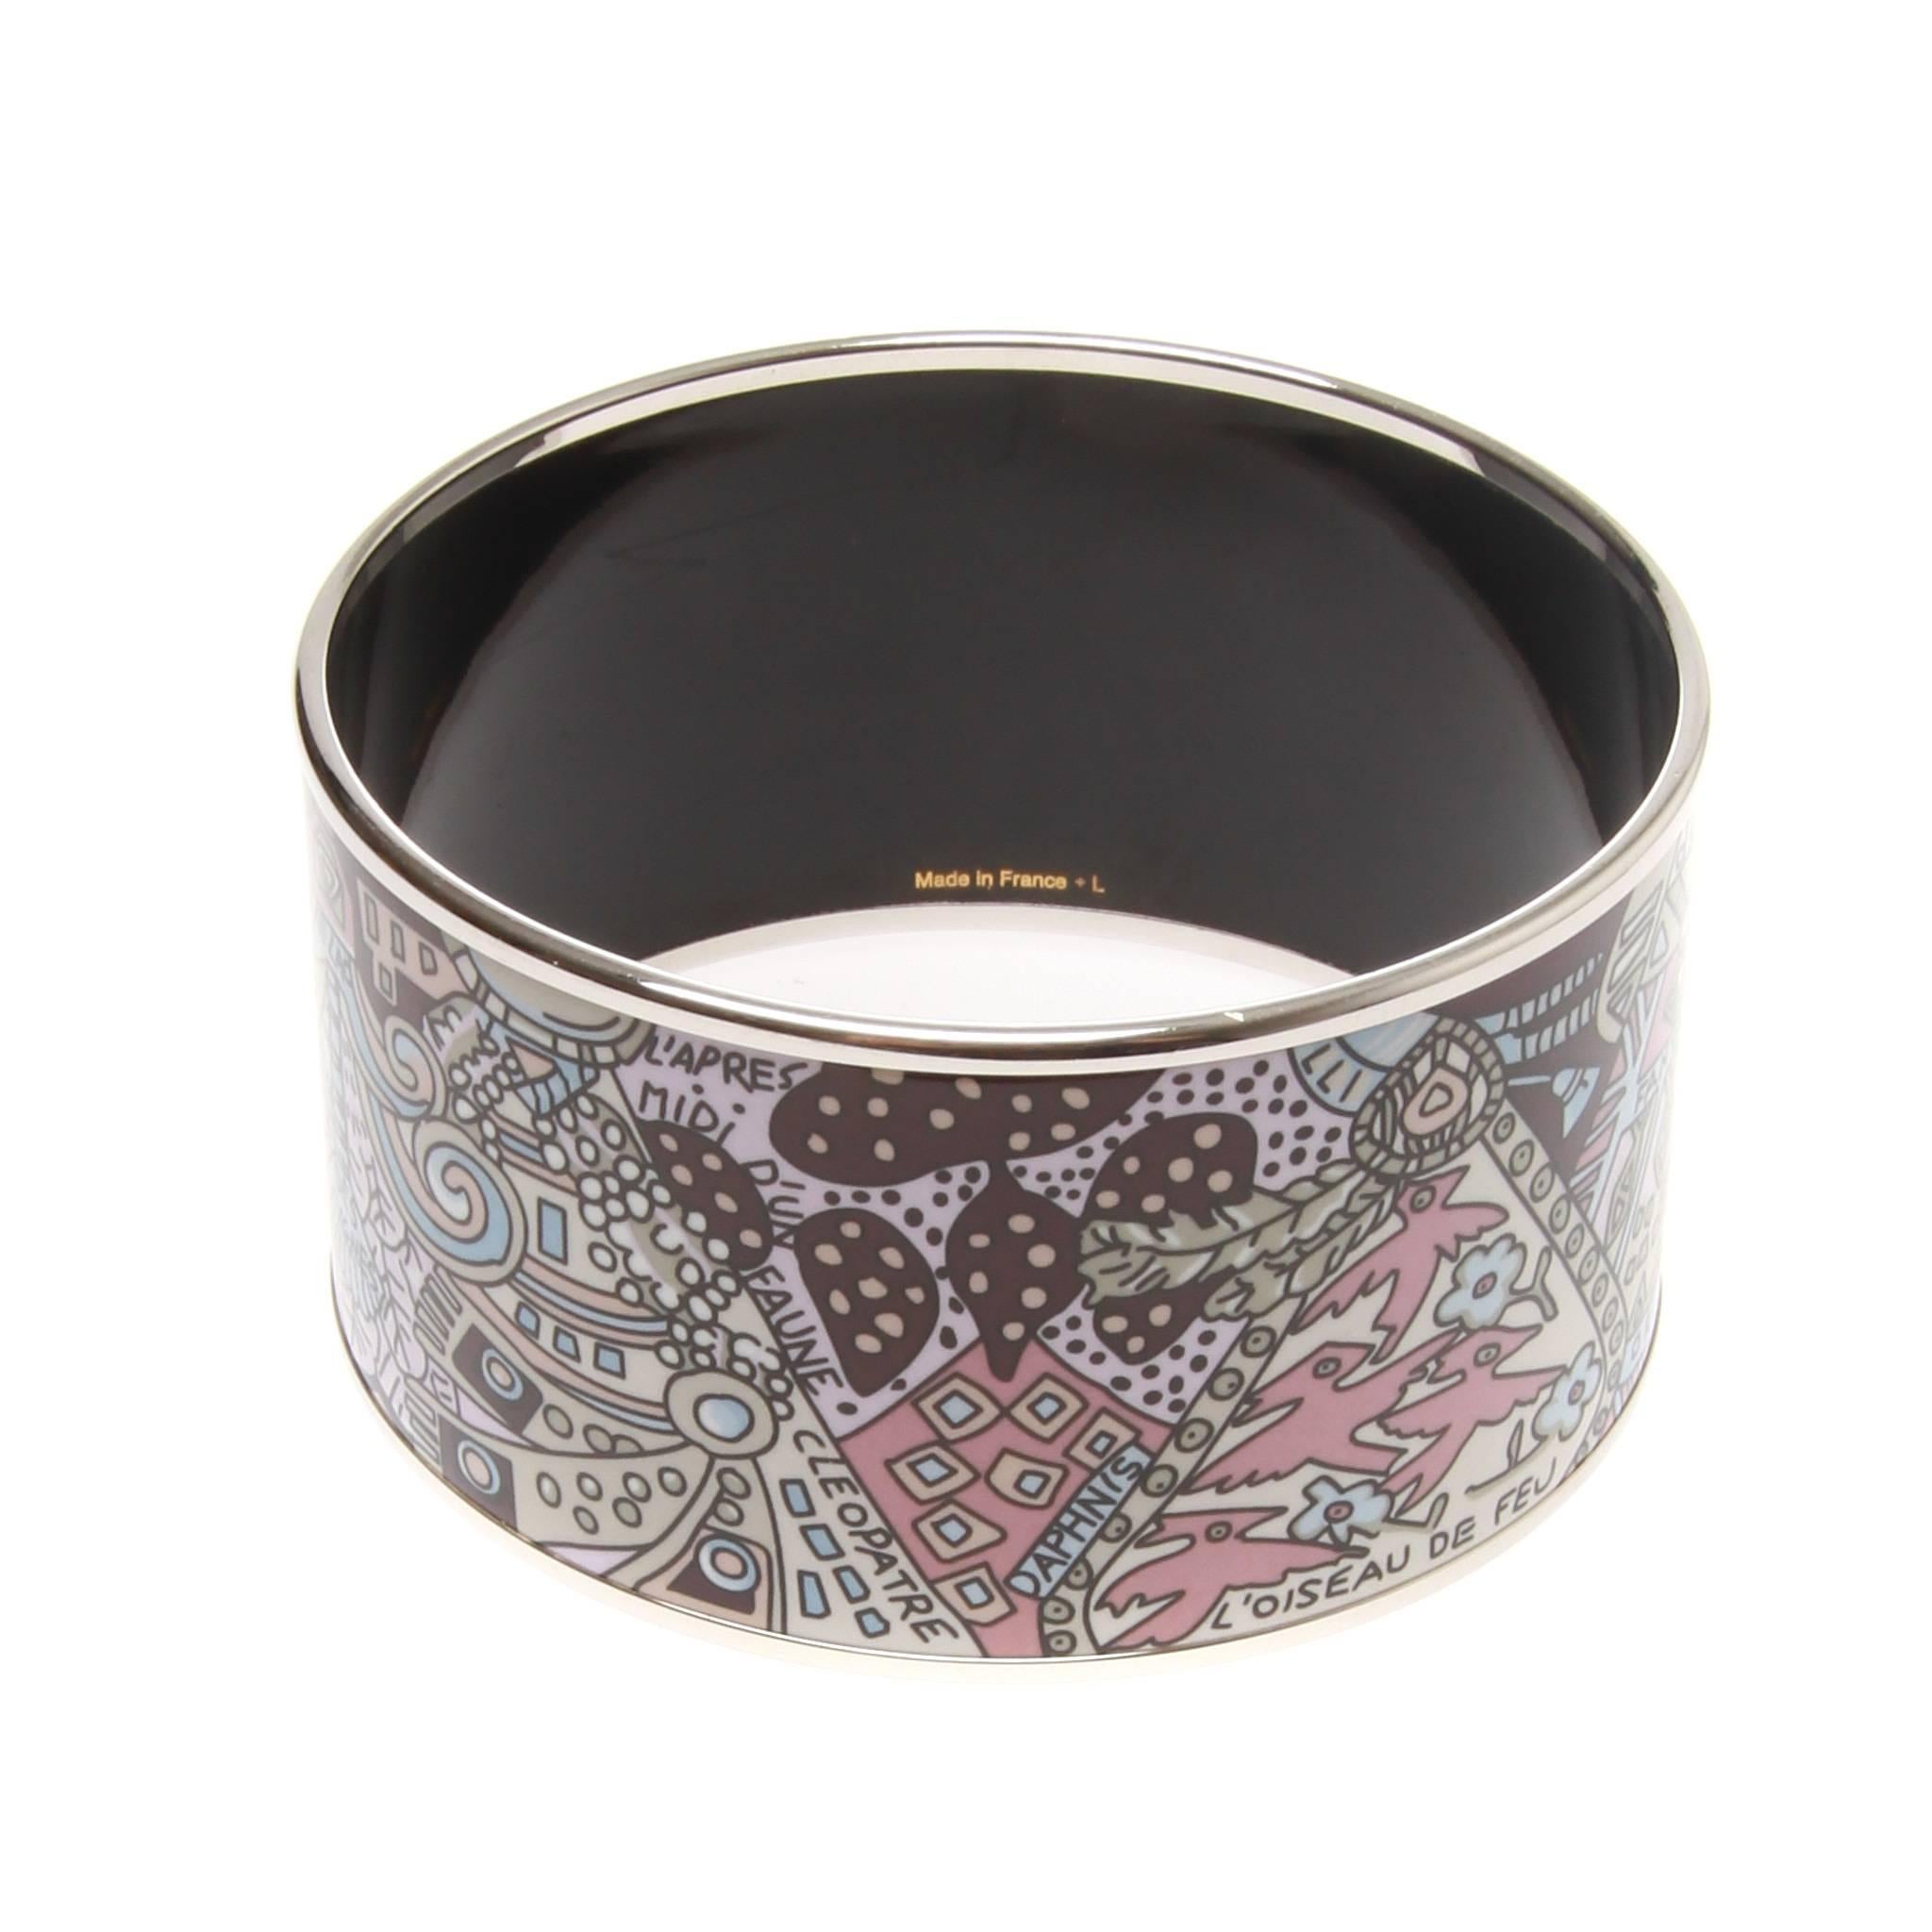 Hermes Extra Large Printed Enamel Cuff Bracelet
Timeless, Popular, Elegant.
A beautifully crafted Hermes extra large printed enamel bracelet.
Features gold plated trim and multiple print.